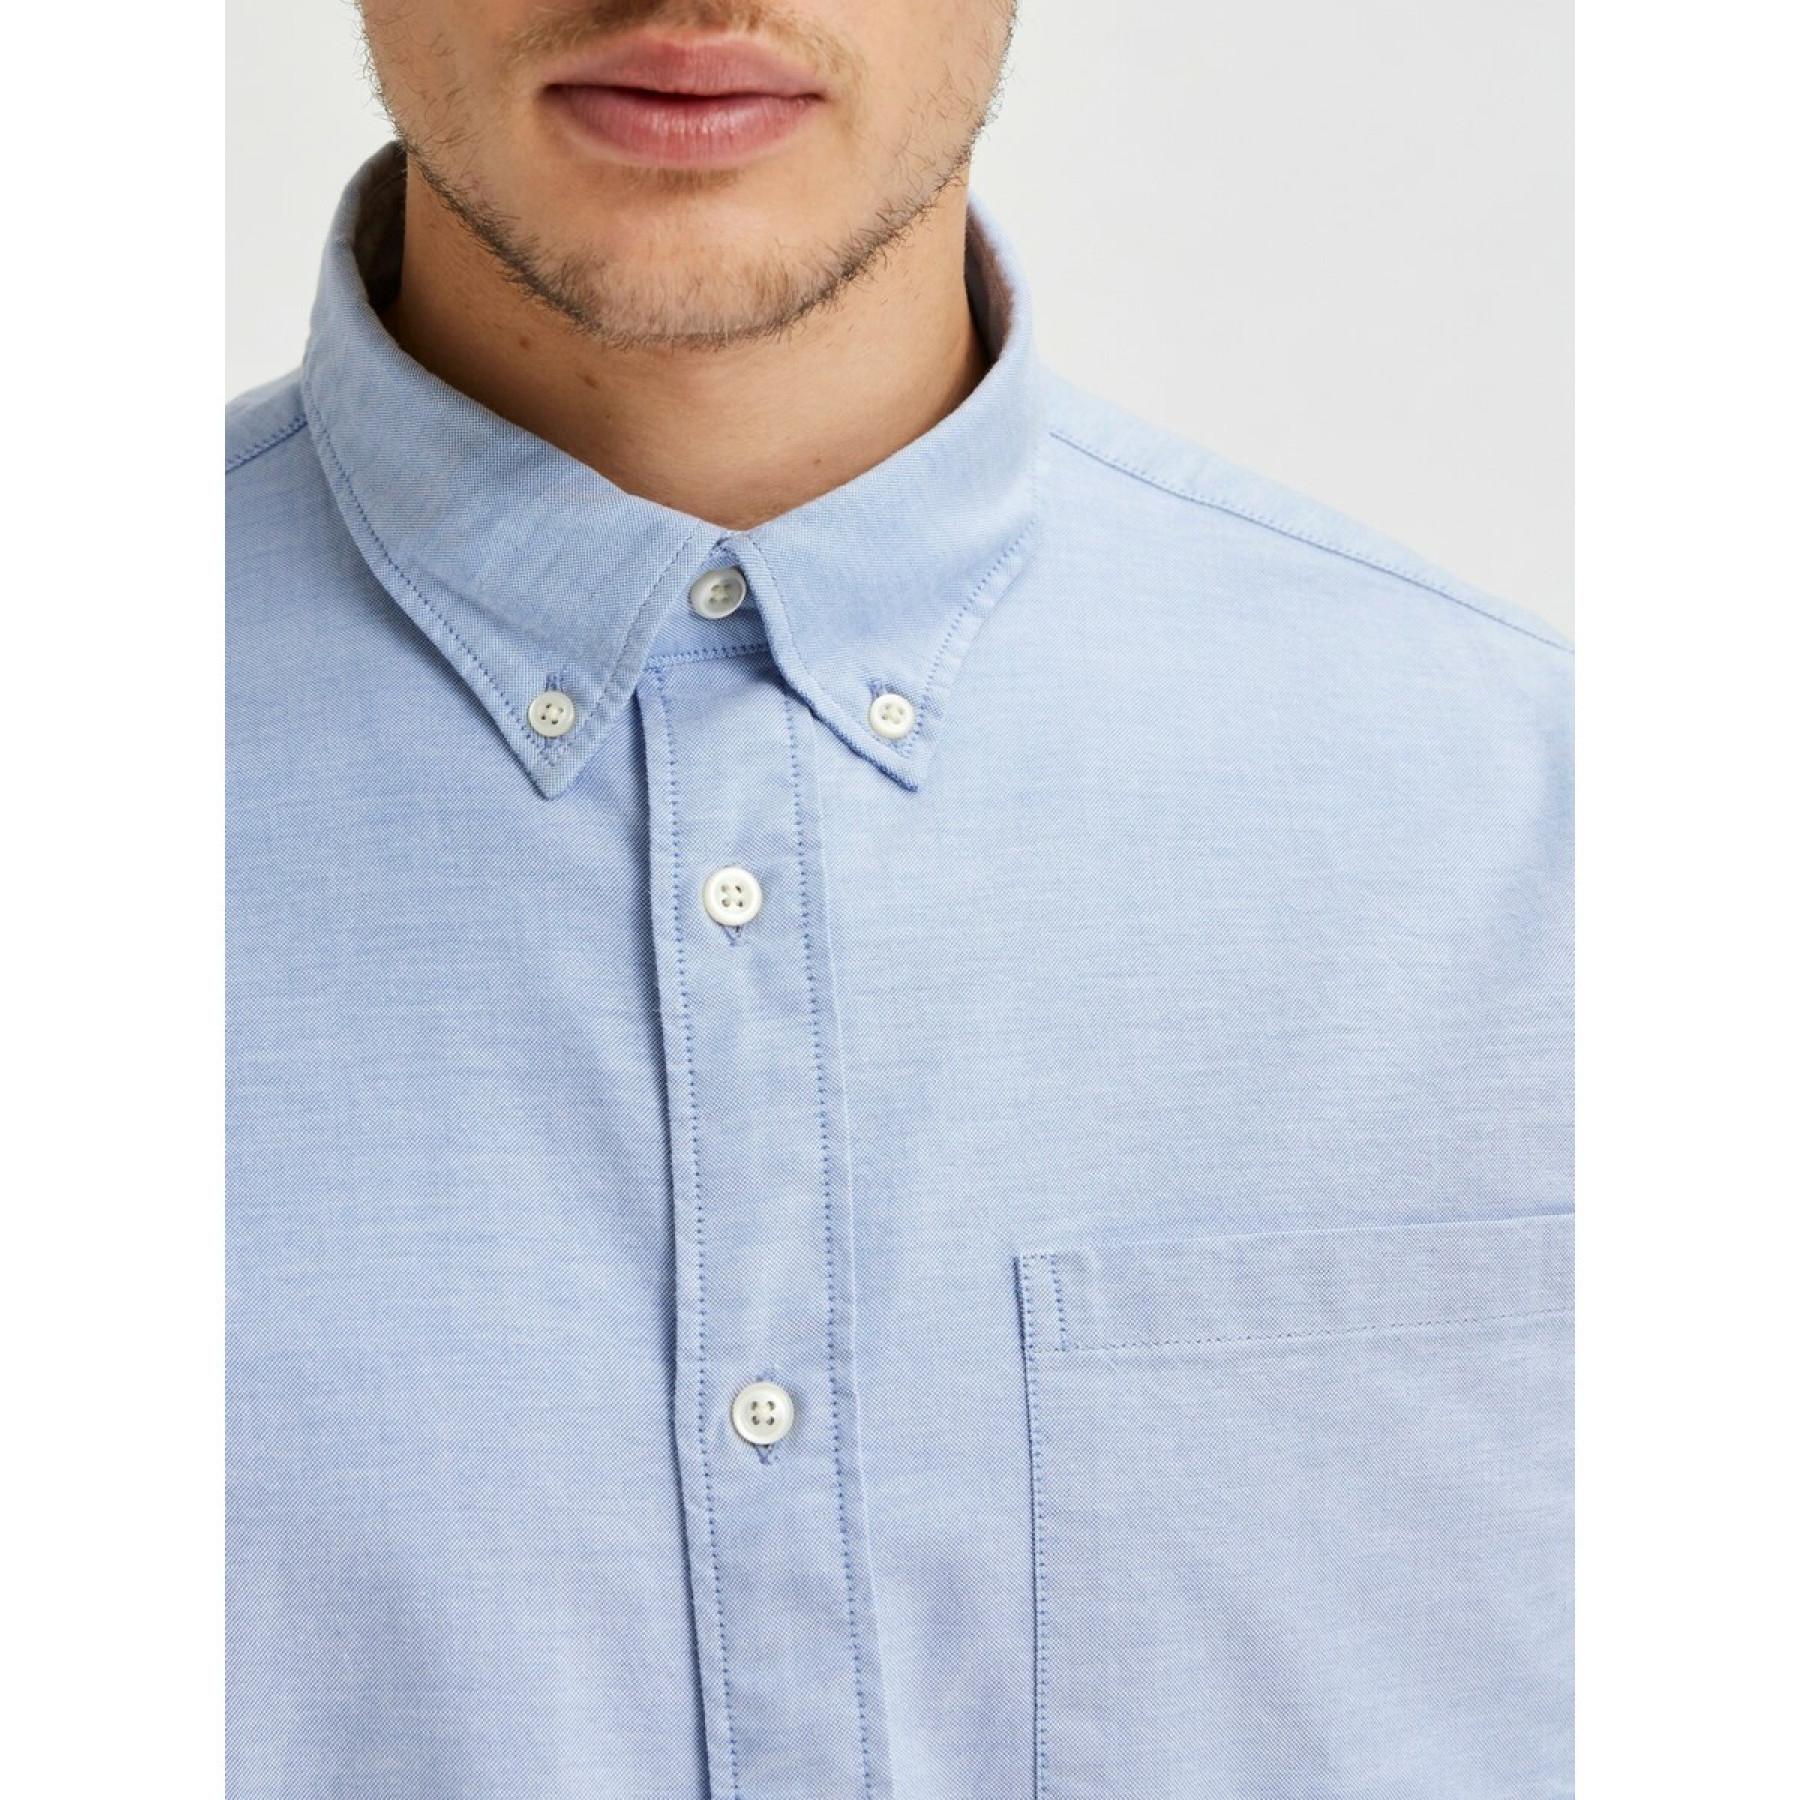 Chemise Selected Rick-ox manches longues flex